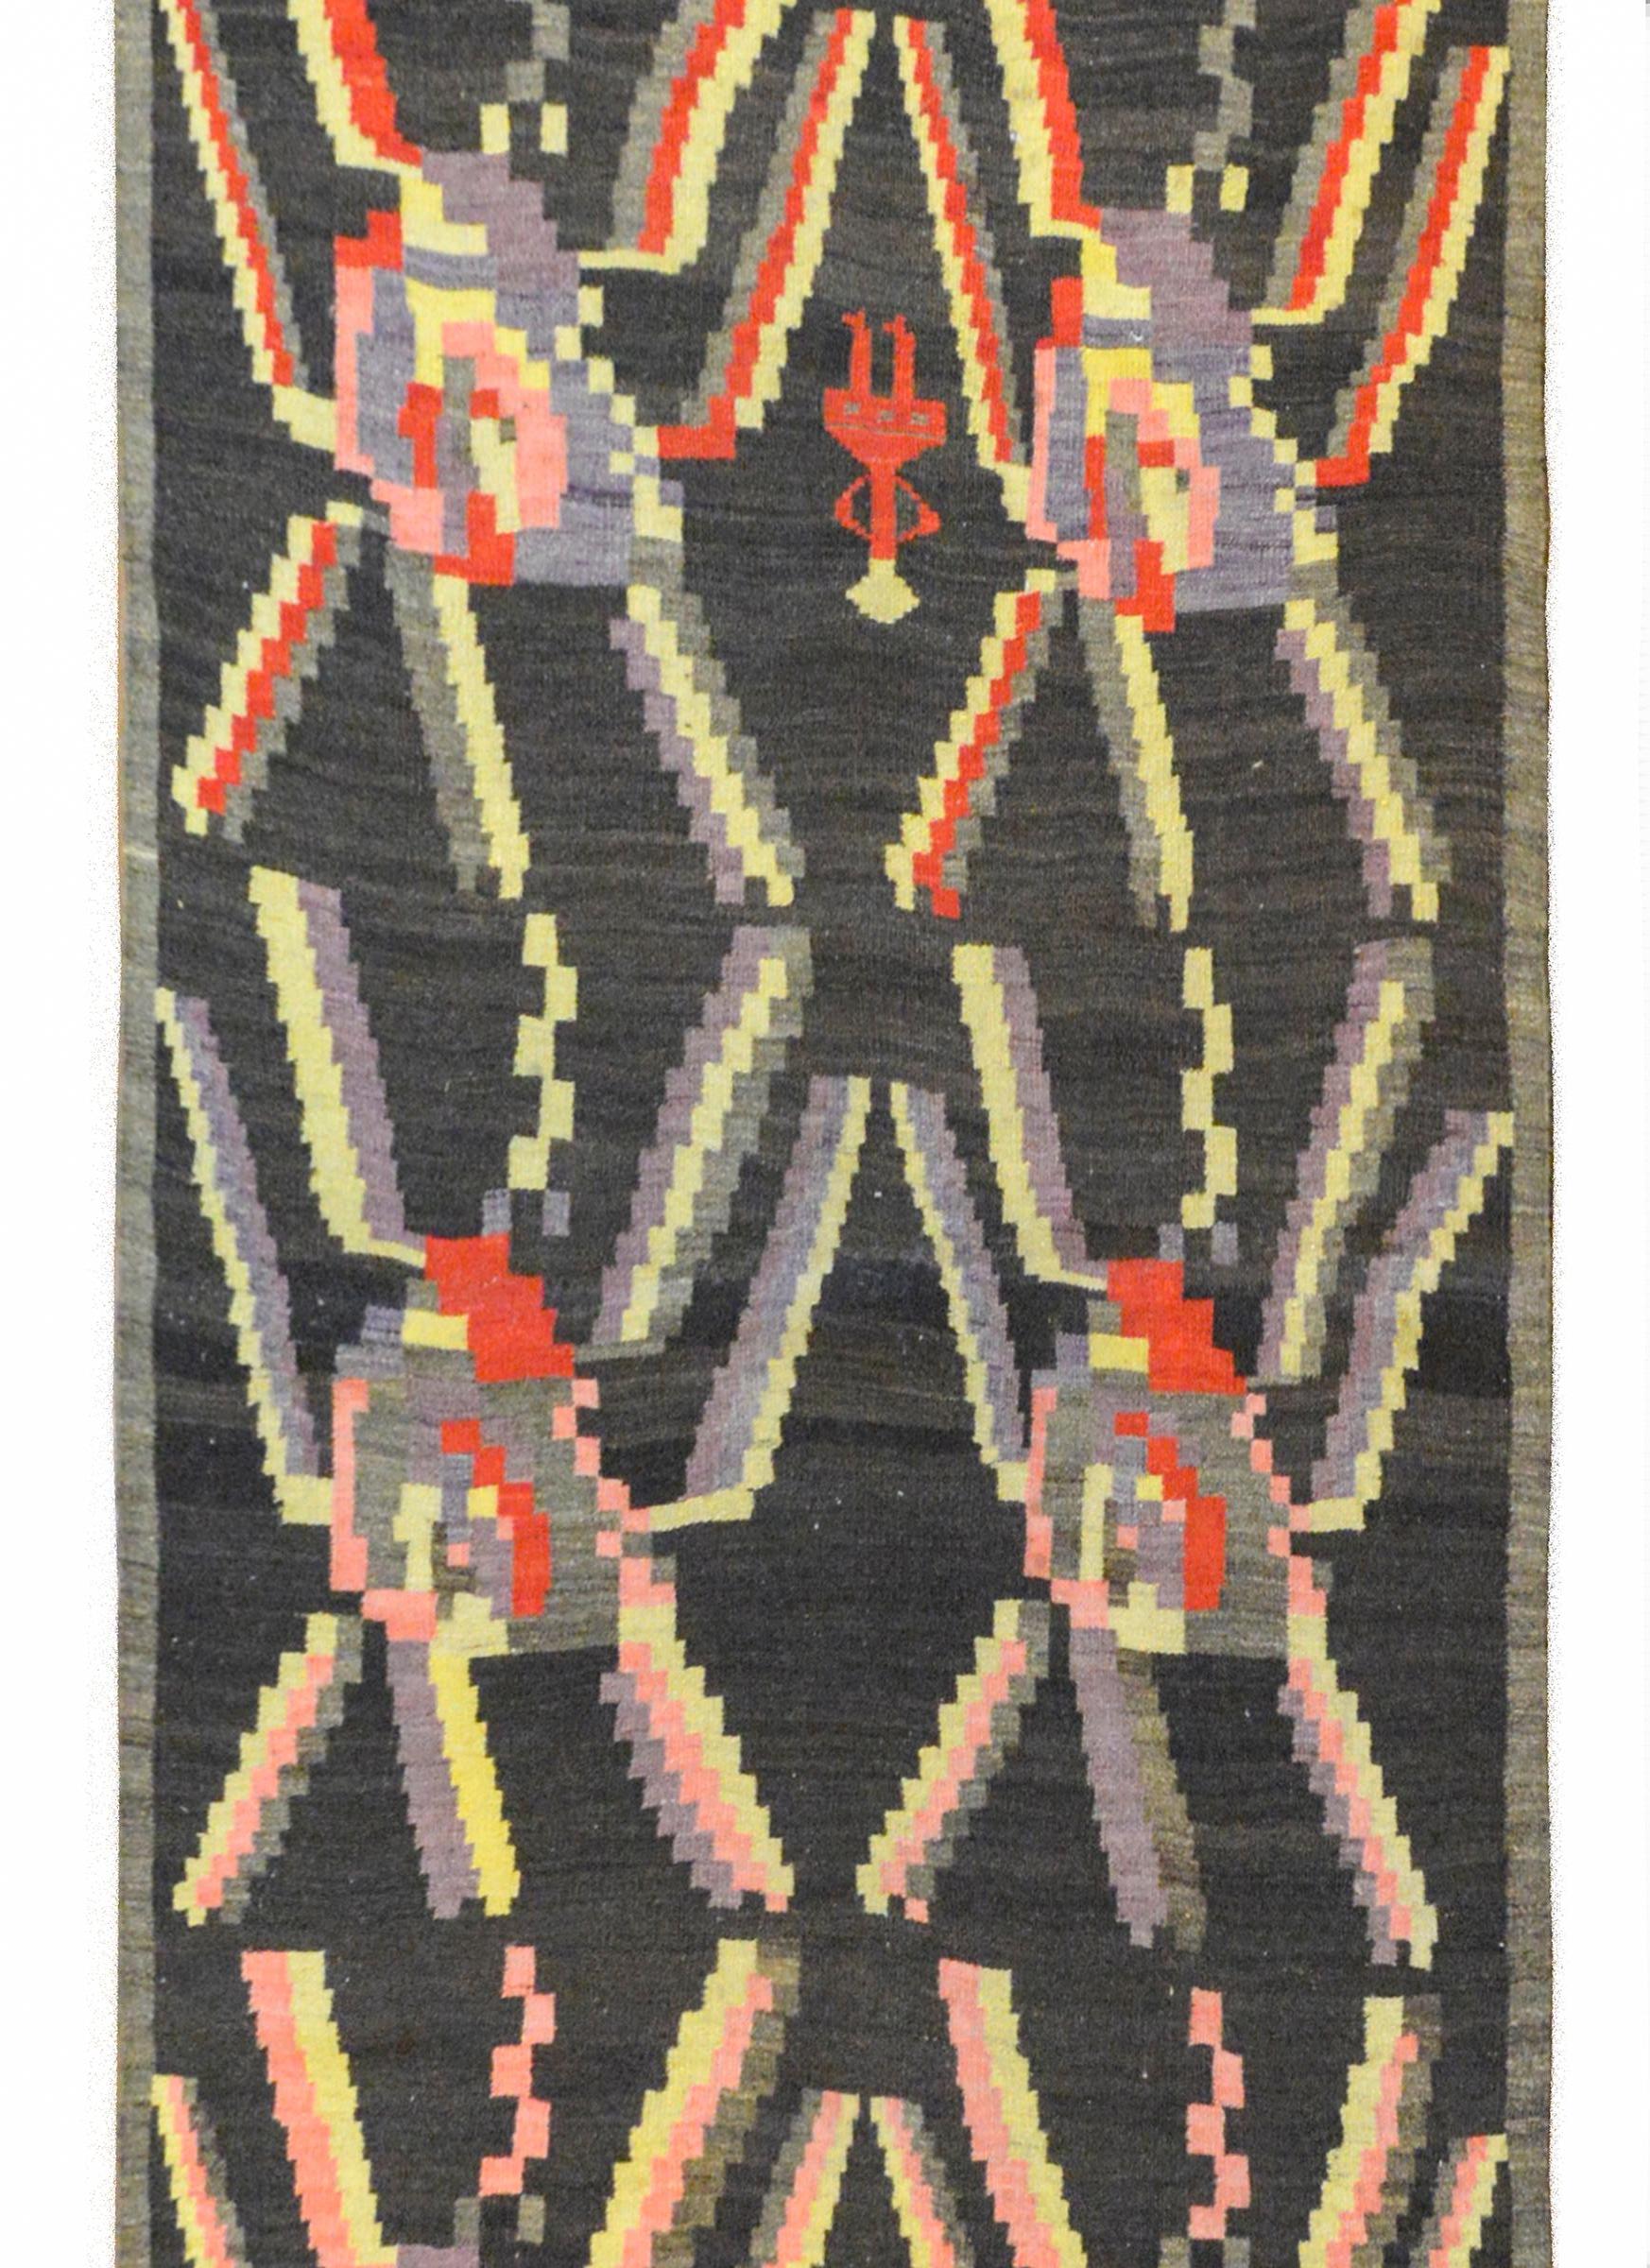 A wonderful early 20th century Turkish Bessarabian Kilim runner with twelve stylized abstract flowers woven in bright crimson, gold, and pale lavender, against a black ground with additional stylized flowers and people.